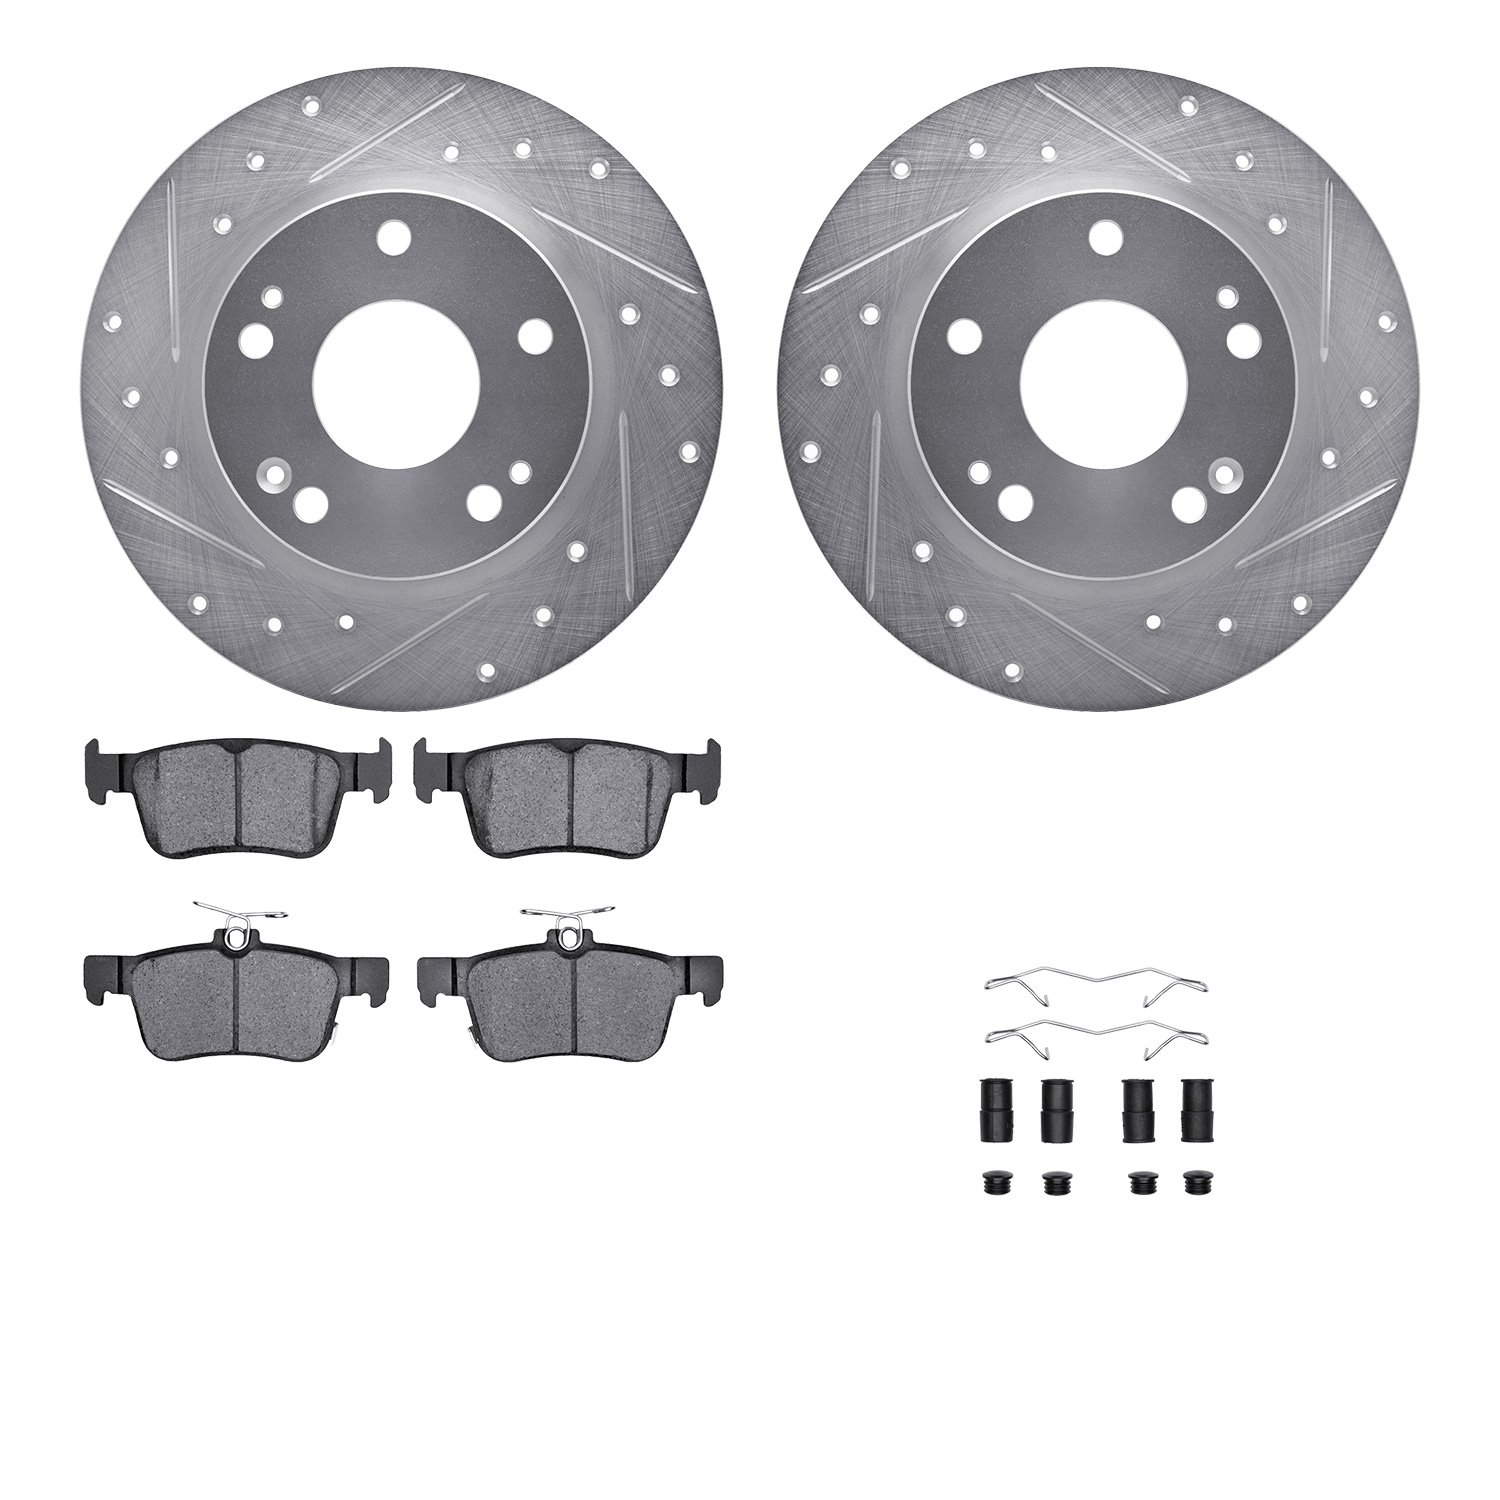 7512-59091 Drilled/Slotted Brake Rotors w/5000 Advanced Brake Pads Kit & Hardware [Silver], Fits Select Acura/Honda, Position: R